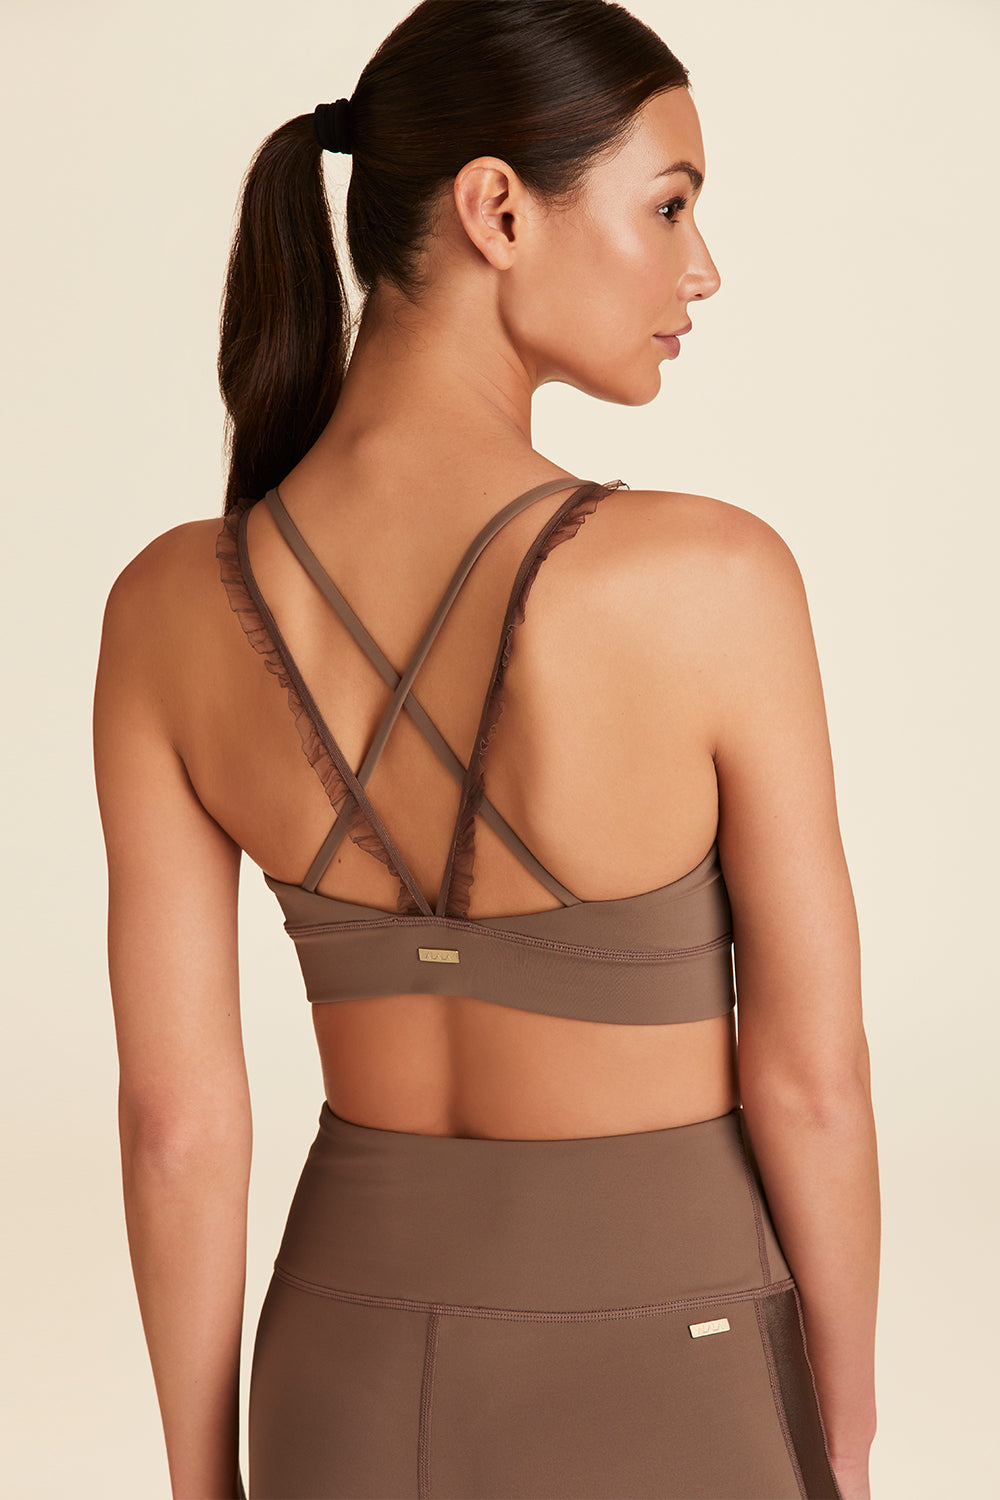 MIRITY Racerback Sports Bras, These Are 's 6 Bestselling Sports Bras  — See Why Customers Love Them